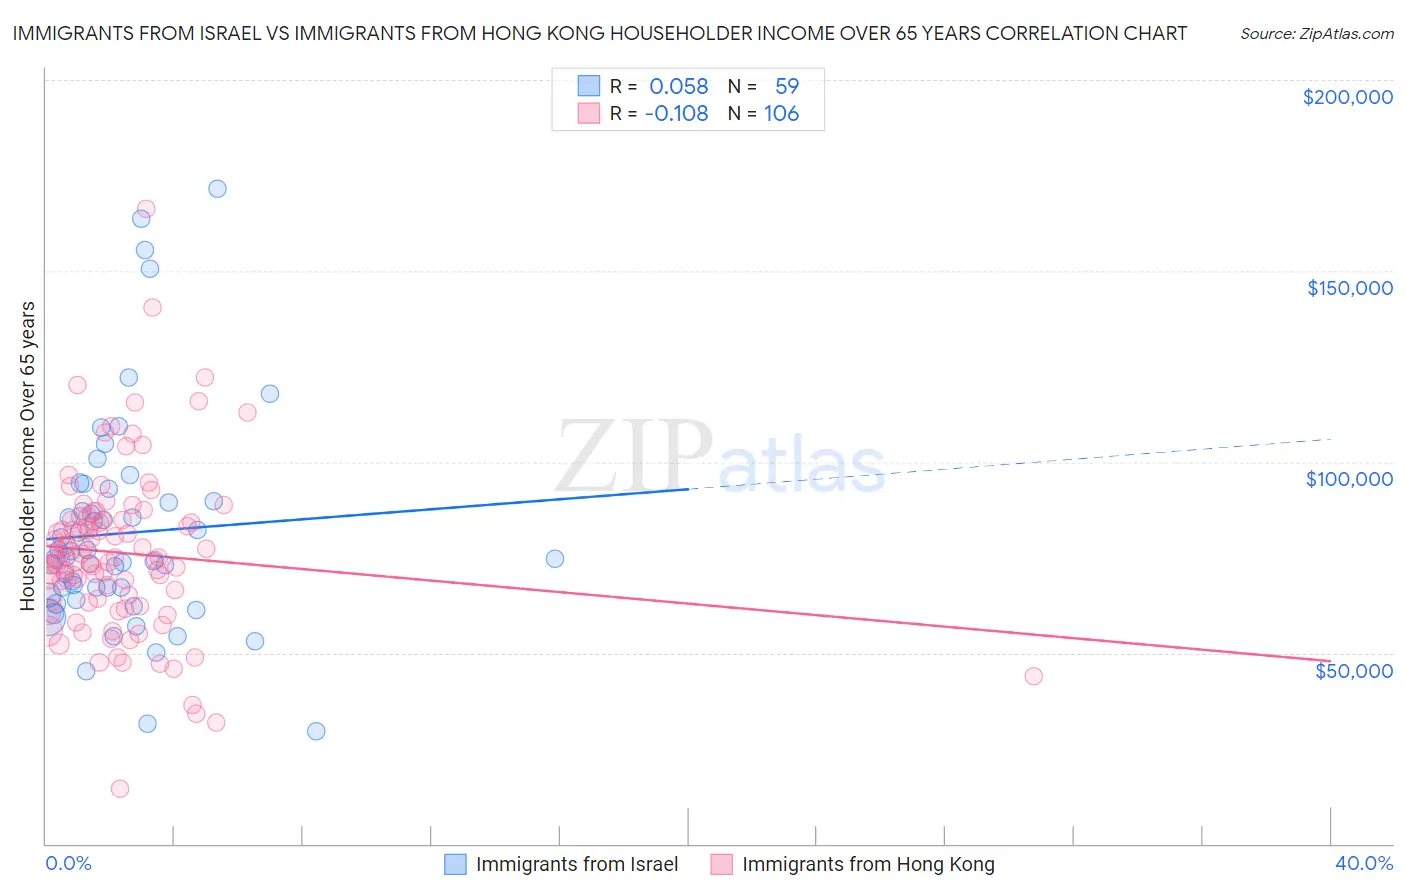 Immigrants from Israel vs Immigrants from Hong Kong Householder Income Over 65 years